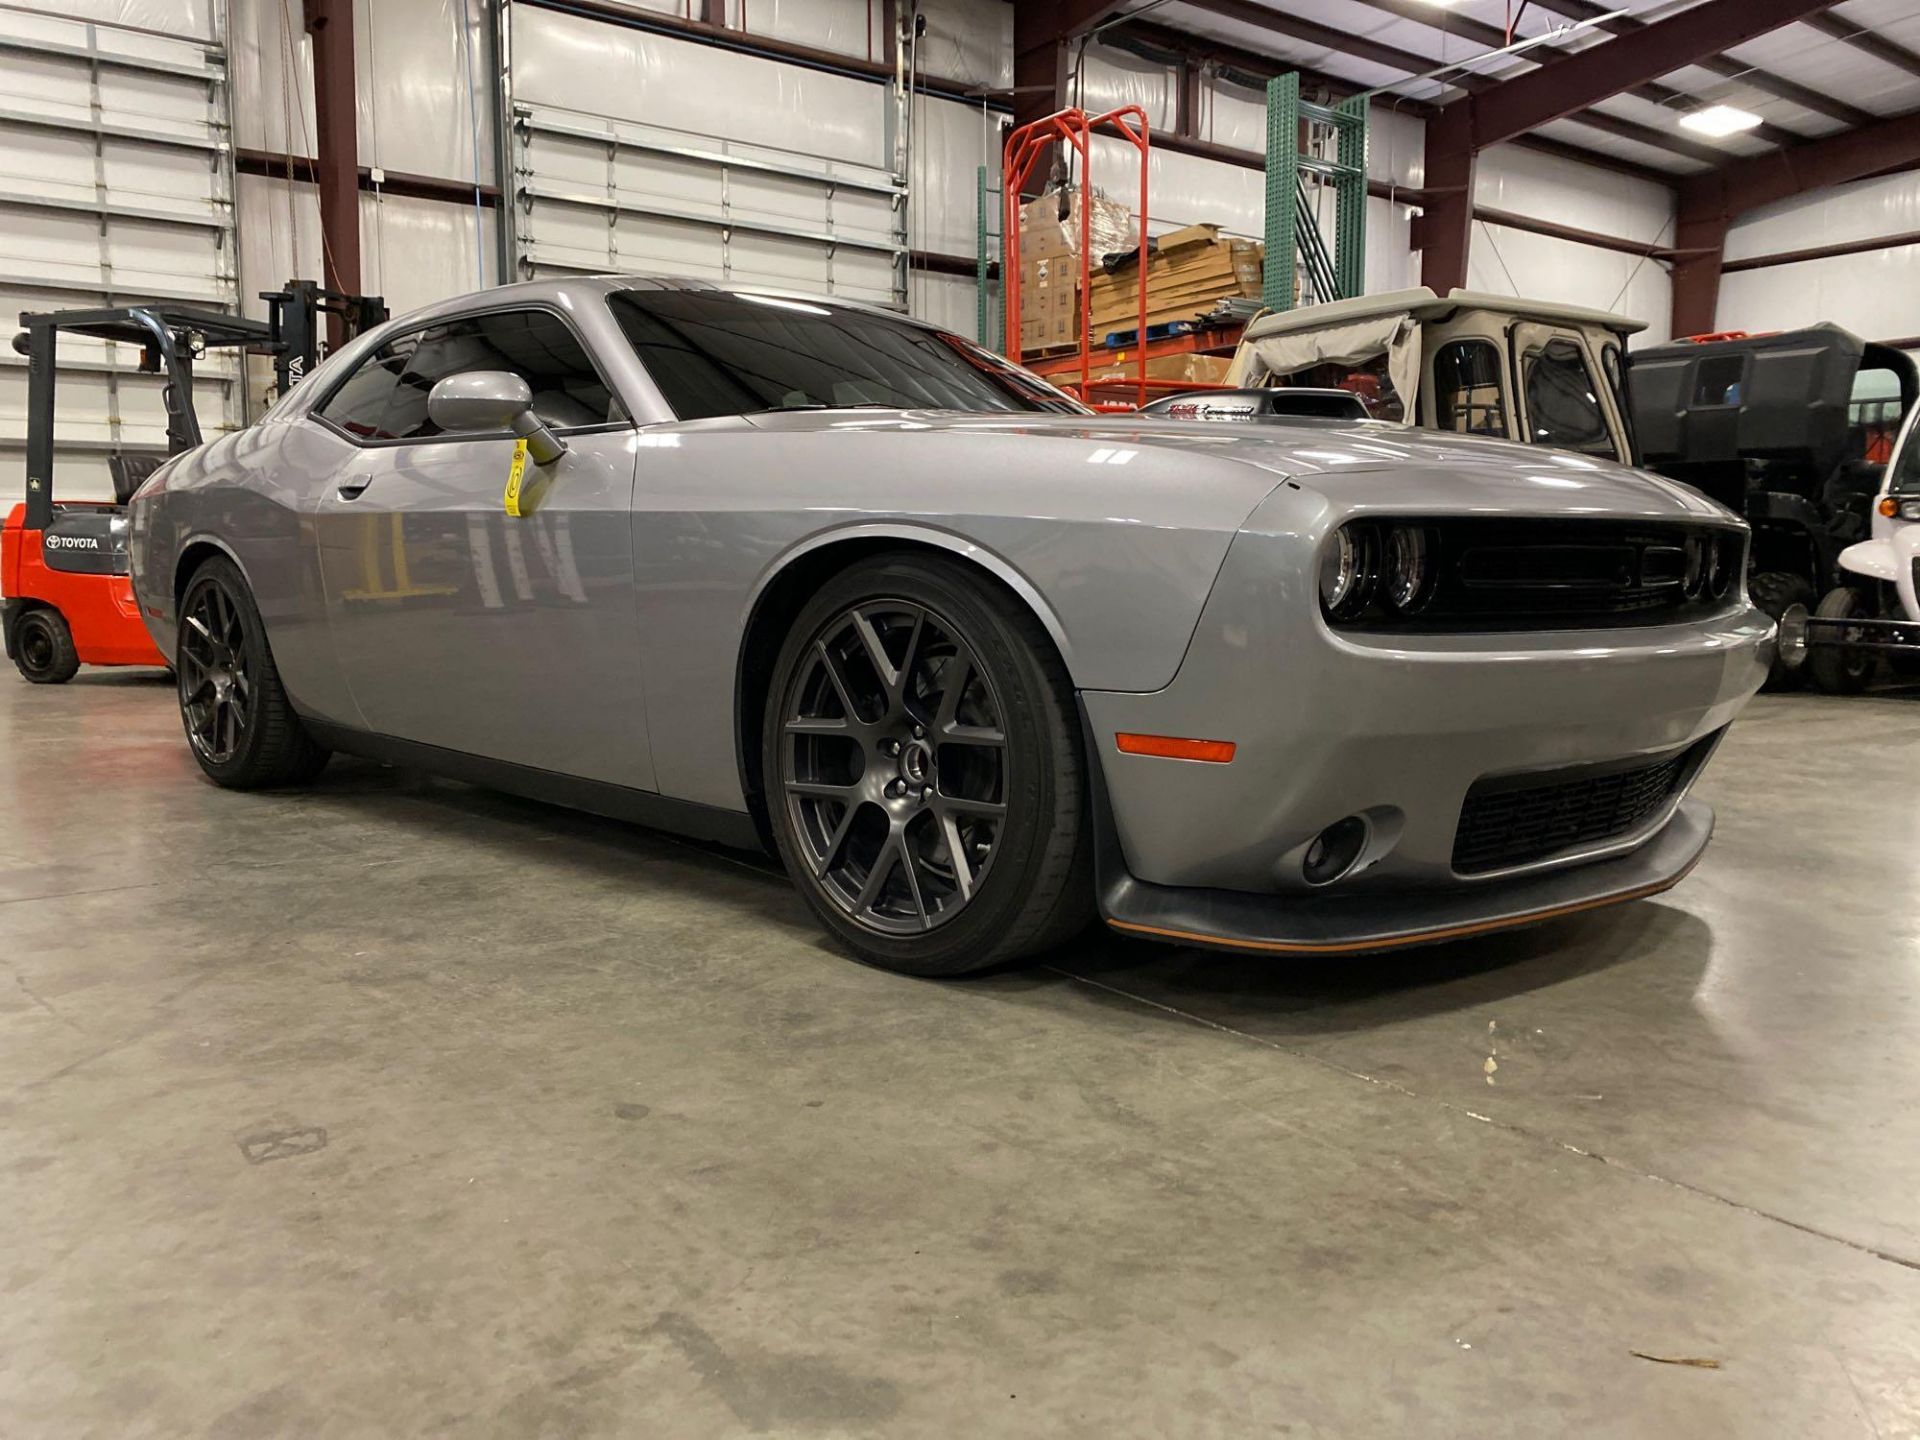 2016 DODGE CHALLENGER WITH SCAT PACK/ SHAKER PACKAGE, APPROX 9,850 MILES SHOWING, RUNS AND OPERATES - Image 2 of 26